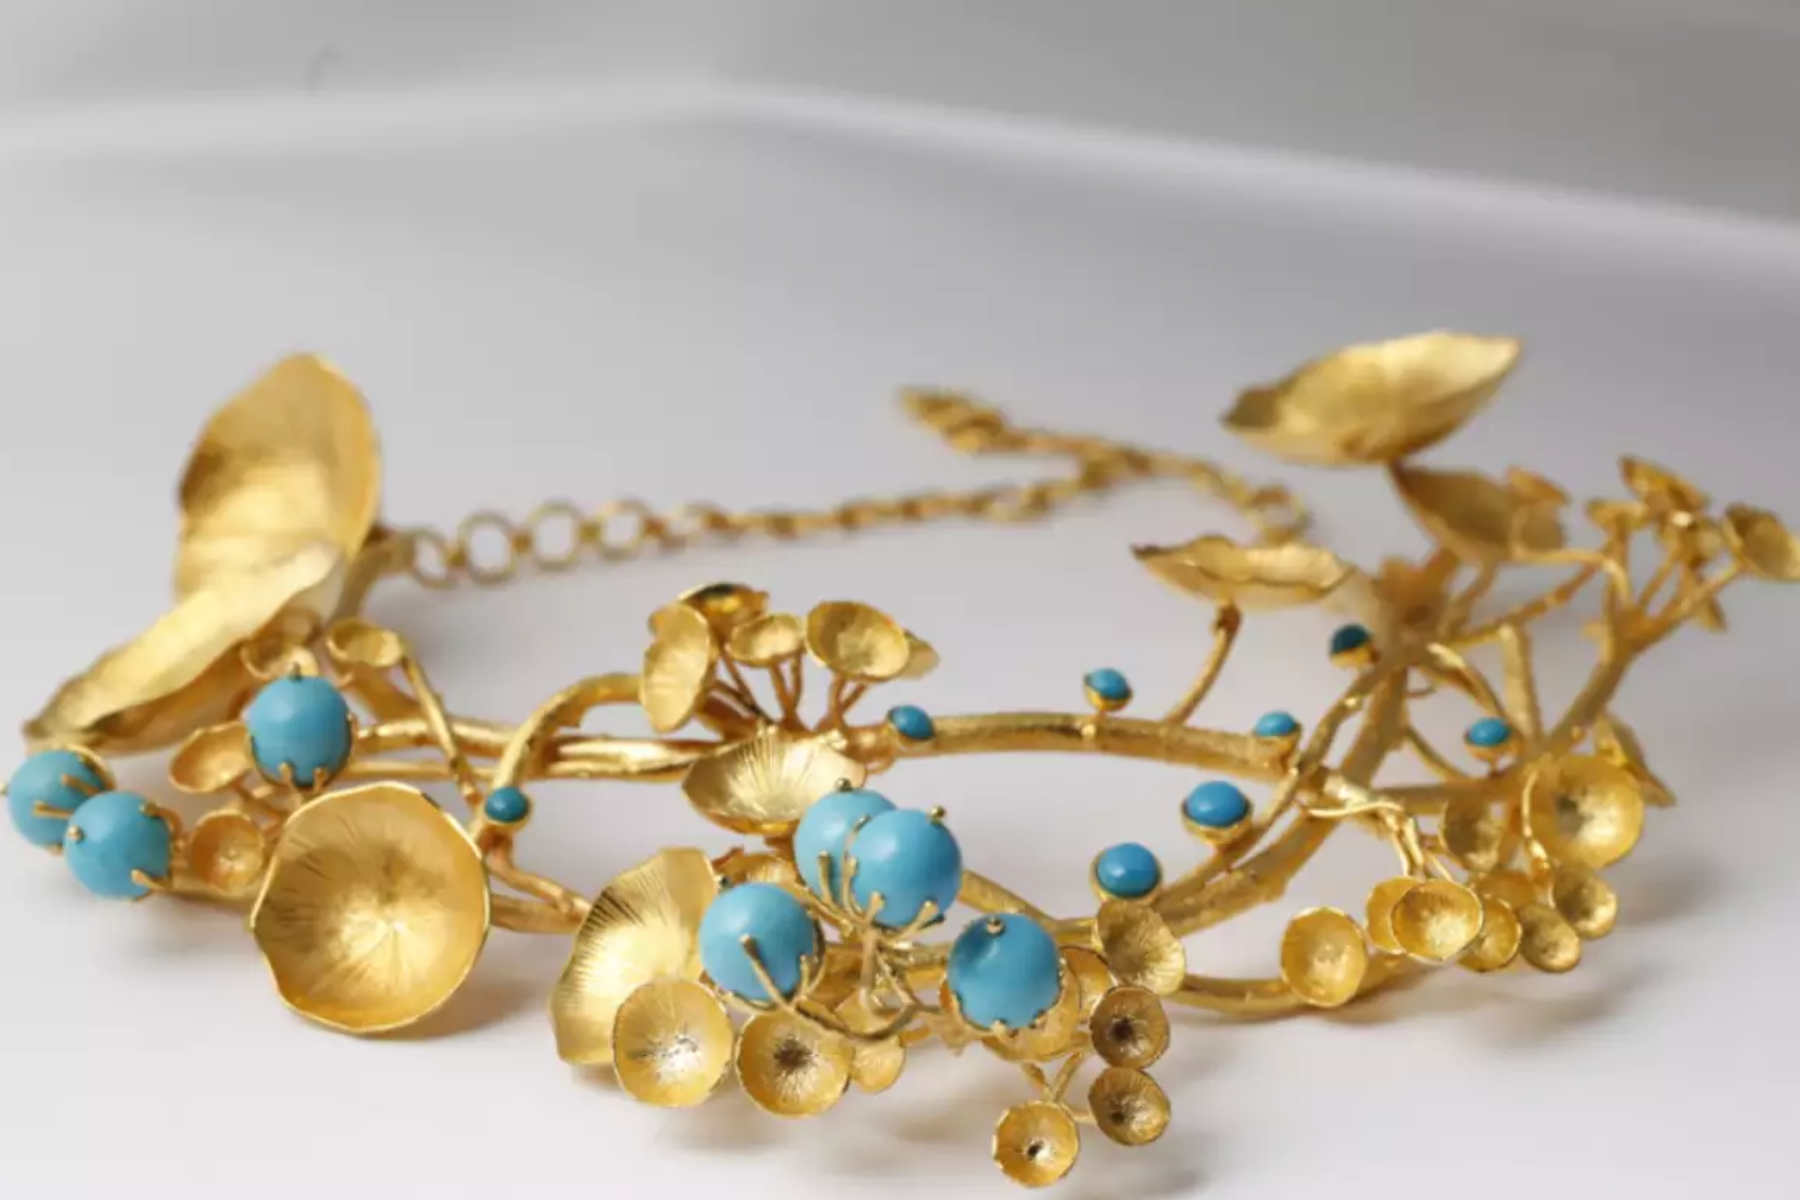 Gold floral necklace with blue stones